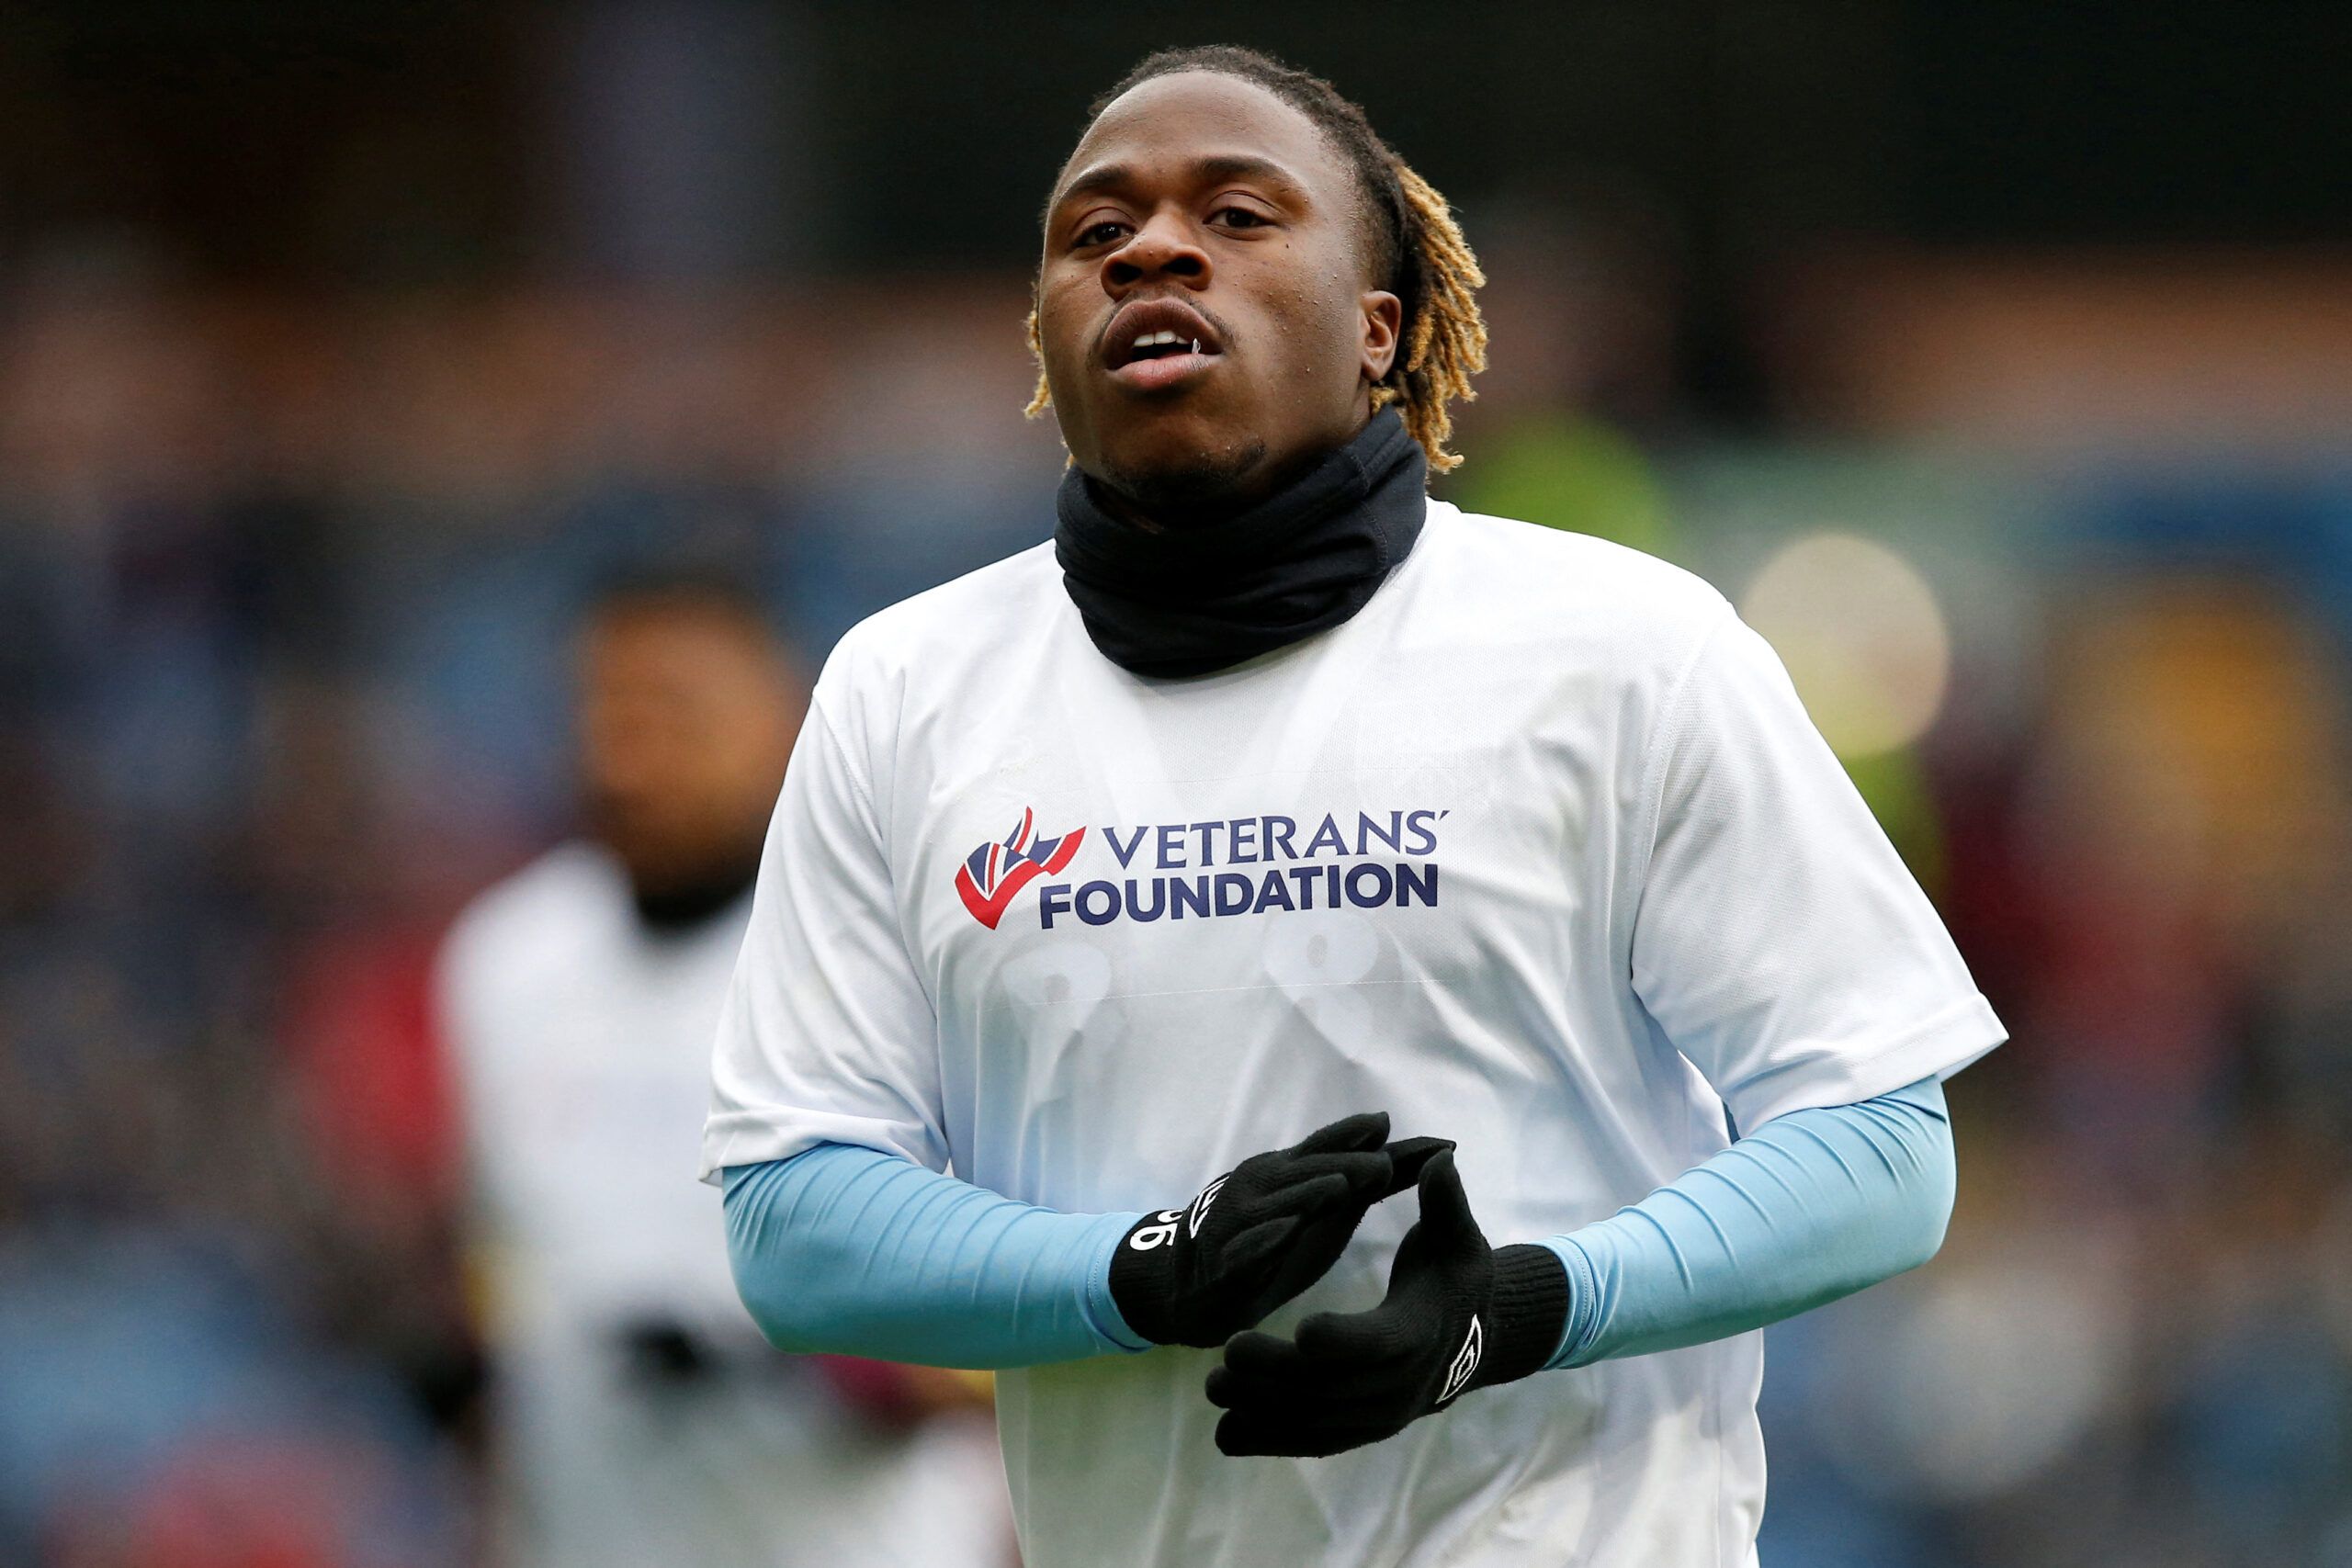 Soccer Football - Championship - Burnley v Preston North End - Turf Moor, Burnley, Britain - February 11, 2023 Burnley's Michael Obafemi wearing a shirt supporting the Veterans foundation during the warm up before the match Action Images/Craig Brough  EDITORIAL USE ONLY. No use with unauthorized audio, video, data, fixture lists, club/league logos or 